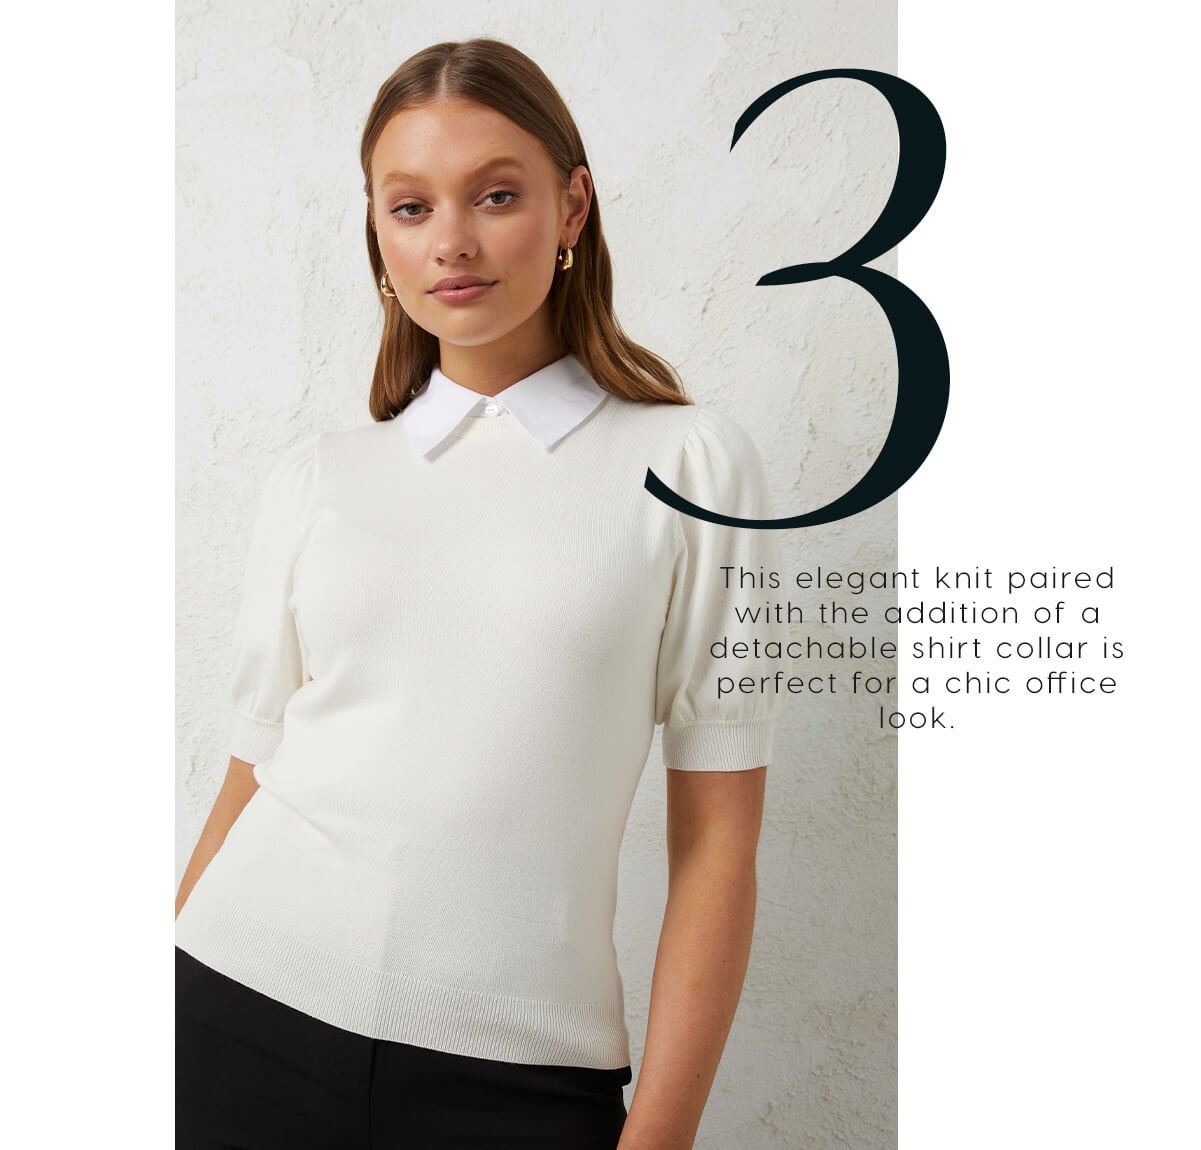 3. This elegant knit paired with the addition of a detachable shirt collar is perfect for a chic office look. 